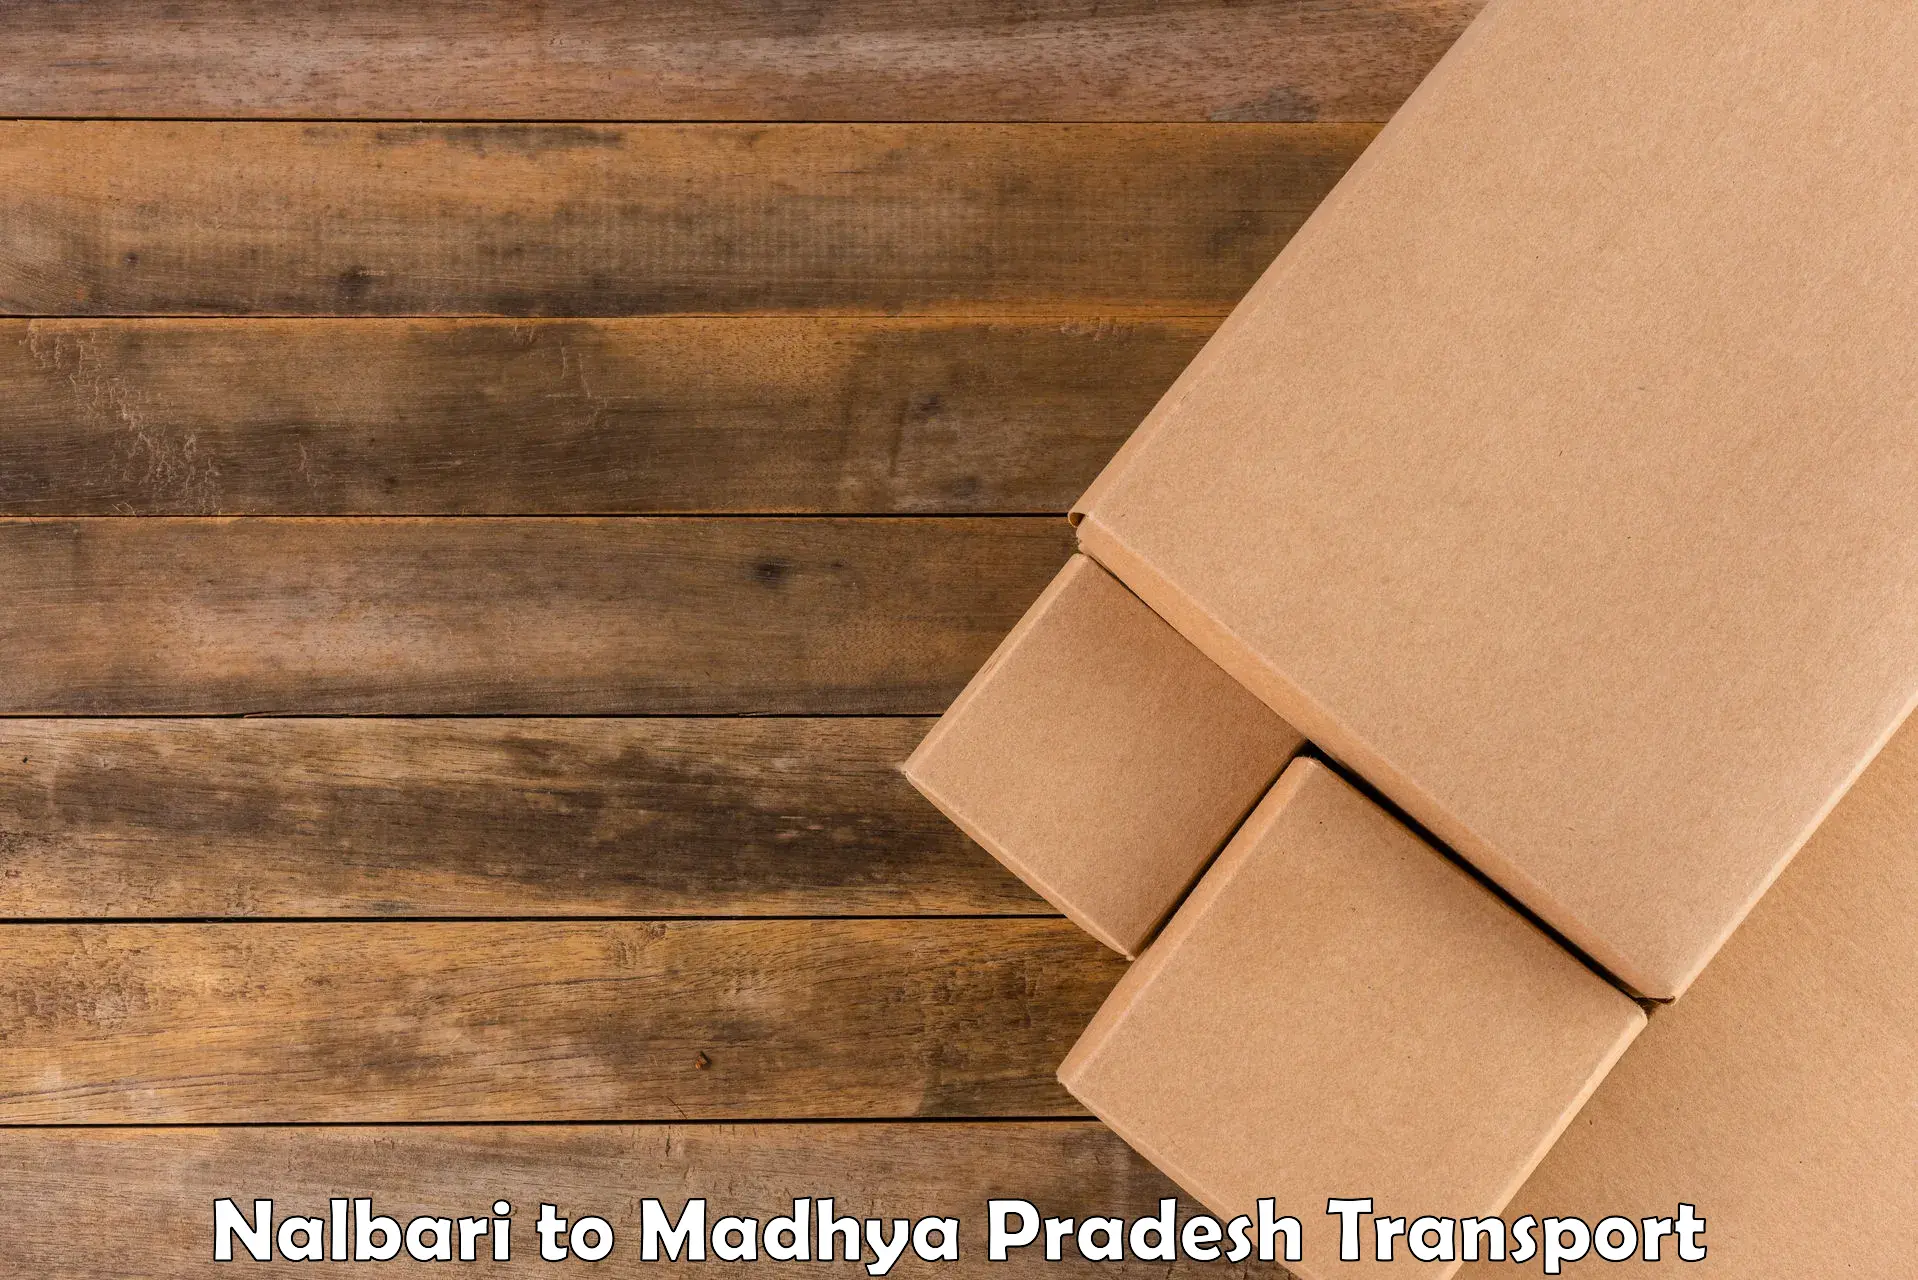 Commercial transport service Nalbari to Sheopur